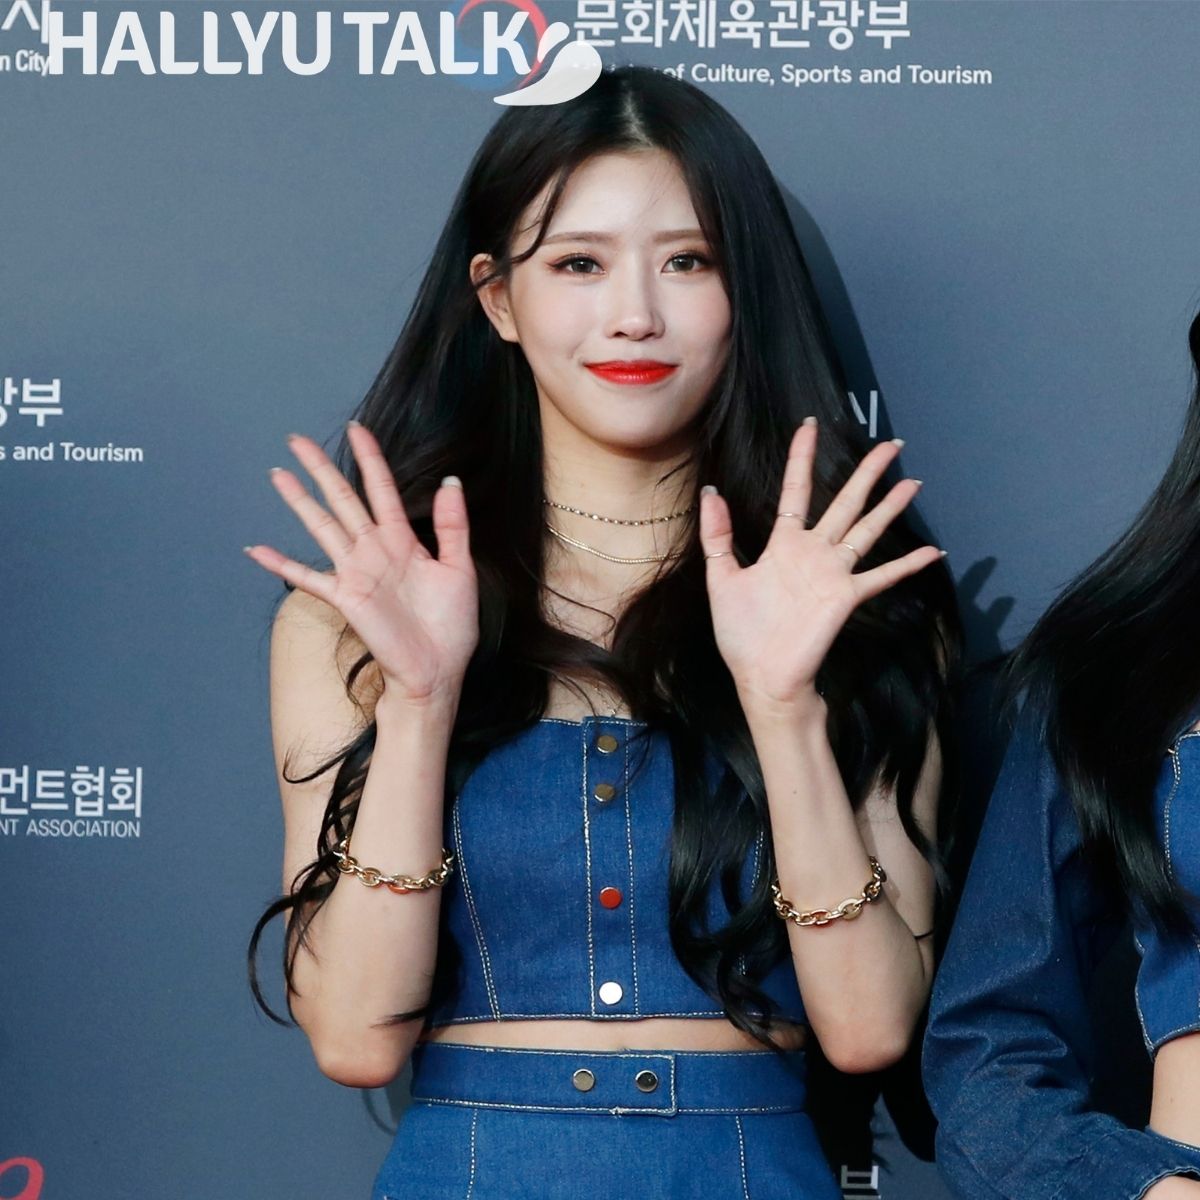 Lovelyz Mijoo poses at an event